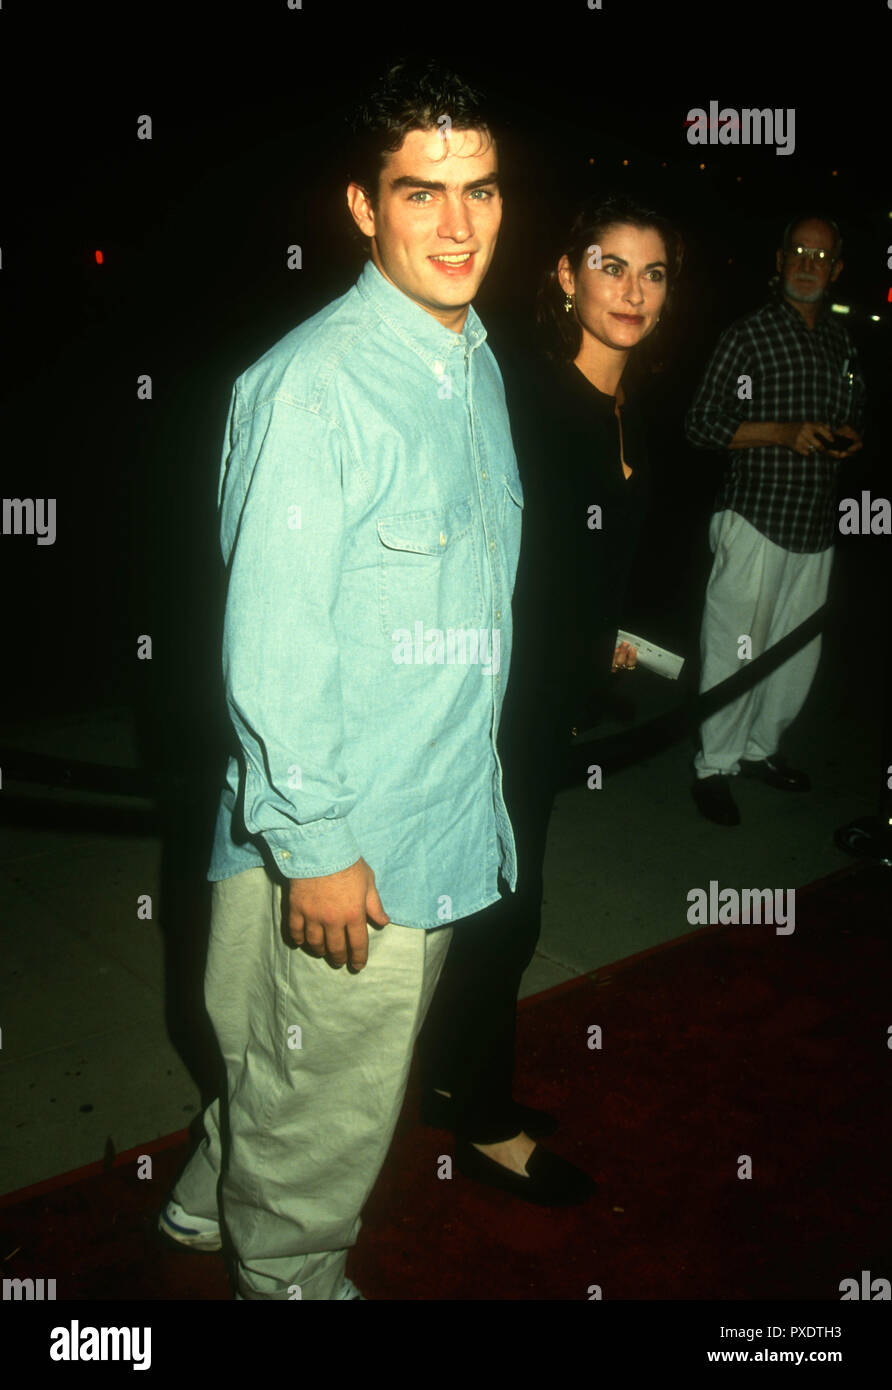 BEVERLY HILLS, CA - NOVEMBER 2: Actor Rodney Harvey and actress Roxana Zal attend 'Jennifer 8' Premiere on November 2, 1992 at the Academy Theatre in Beverly Hills, California. Photo by Barry King/Alamy Stock Photo Stock Photo